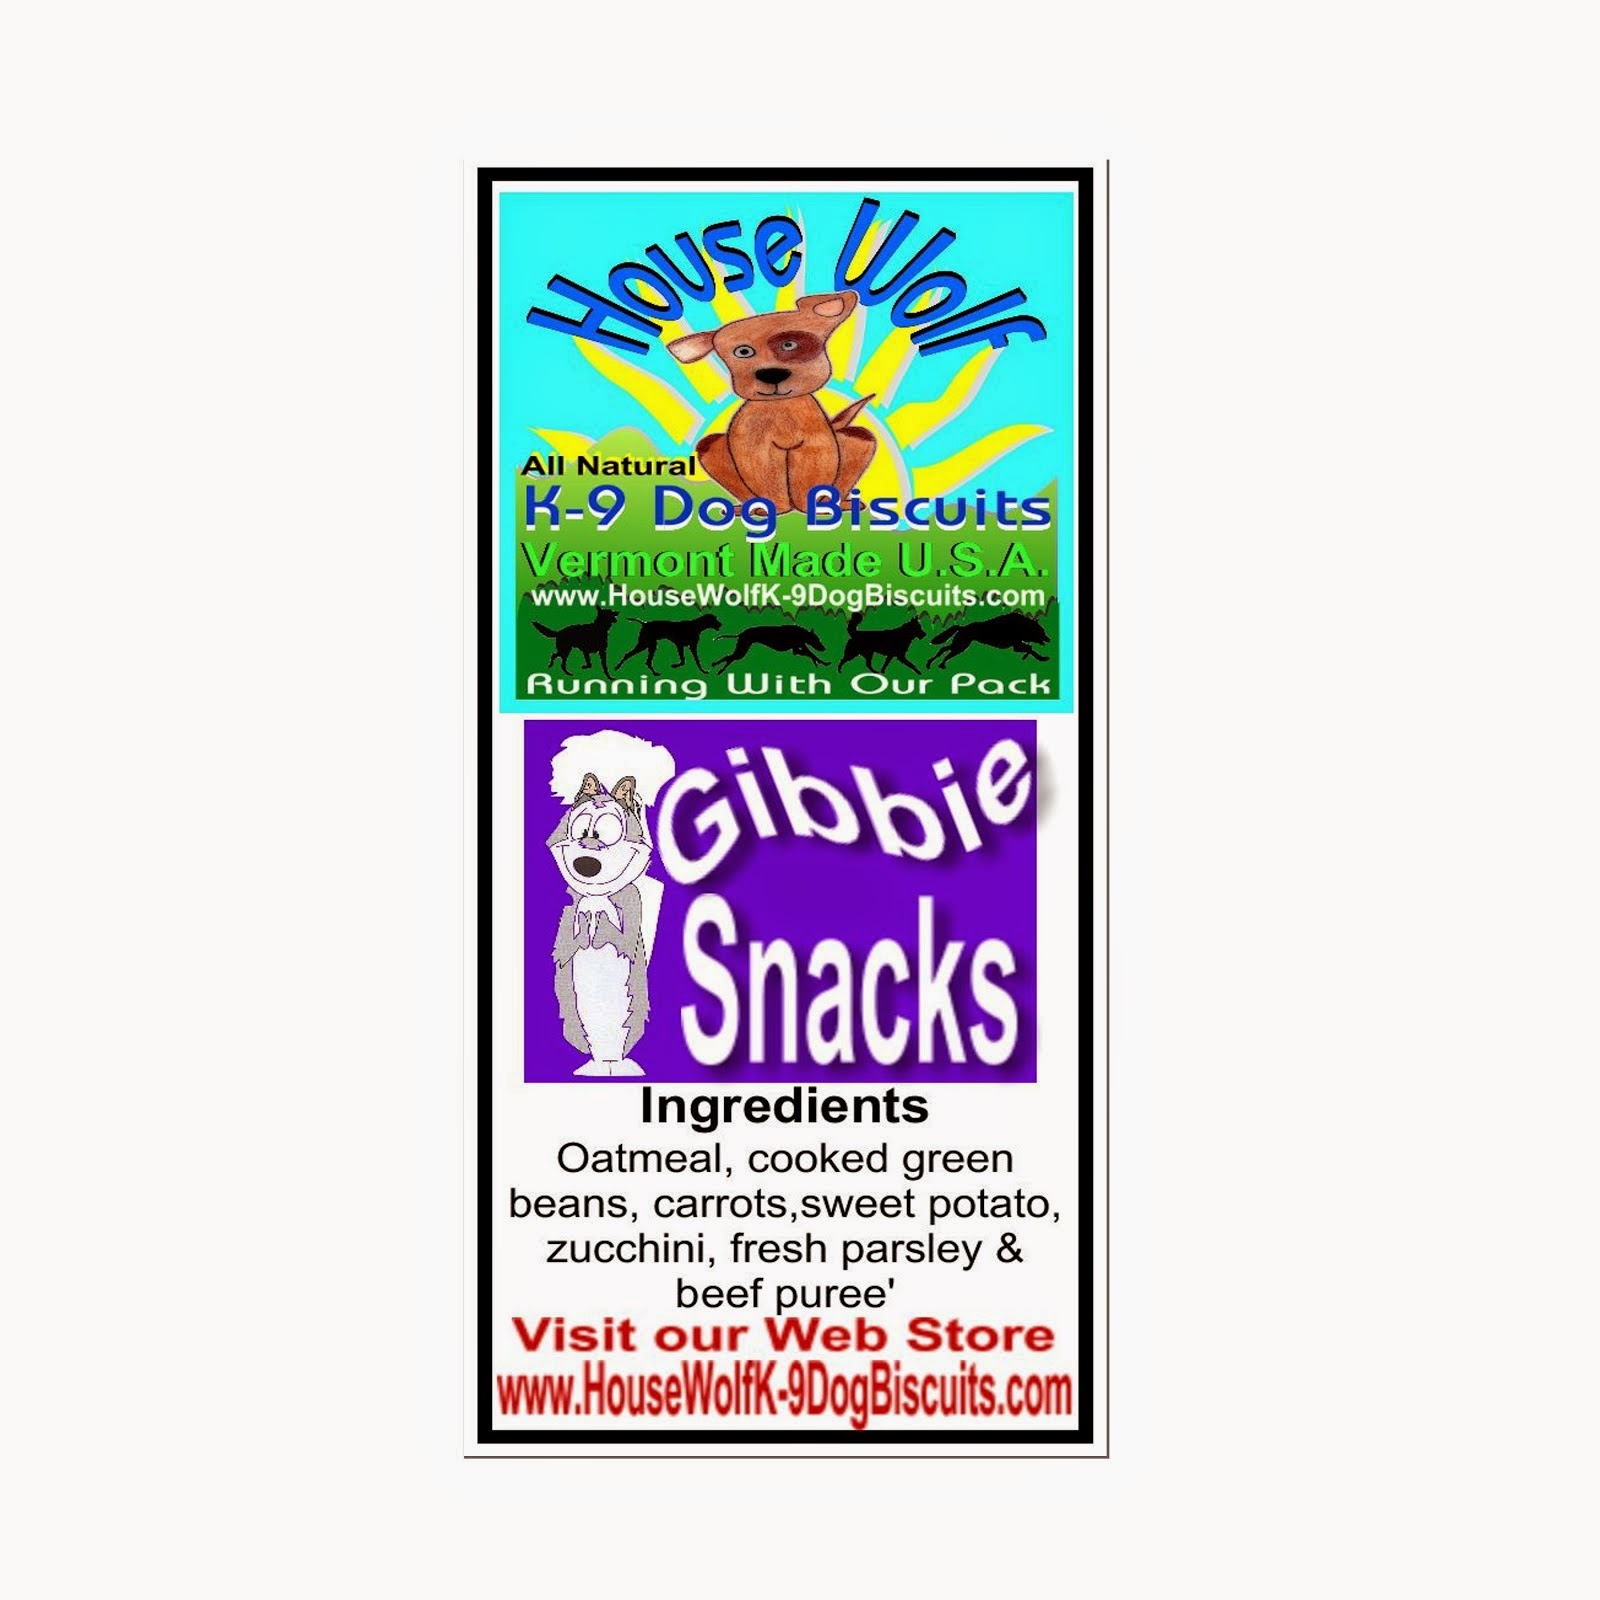 Gibbie Snack for the K-9 Living with Epilepsy